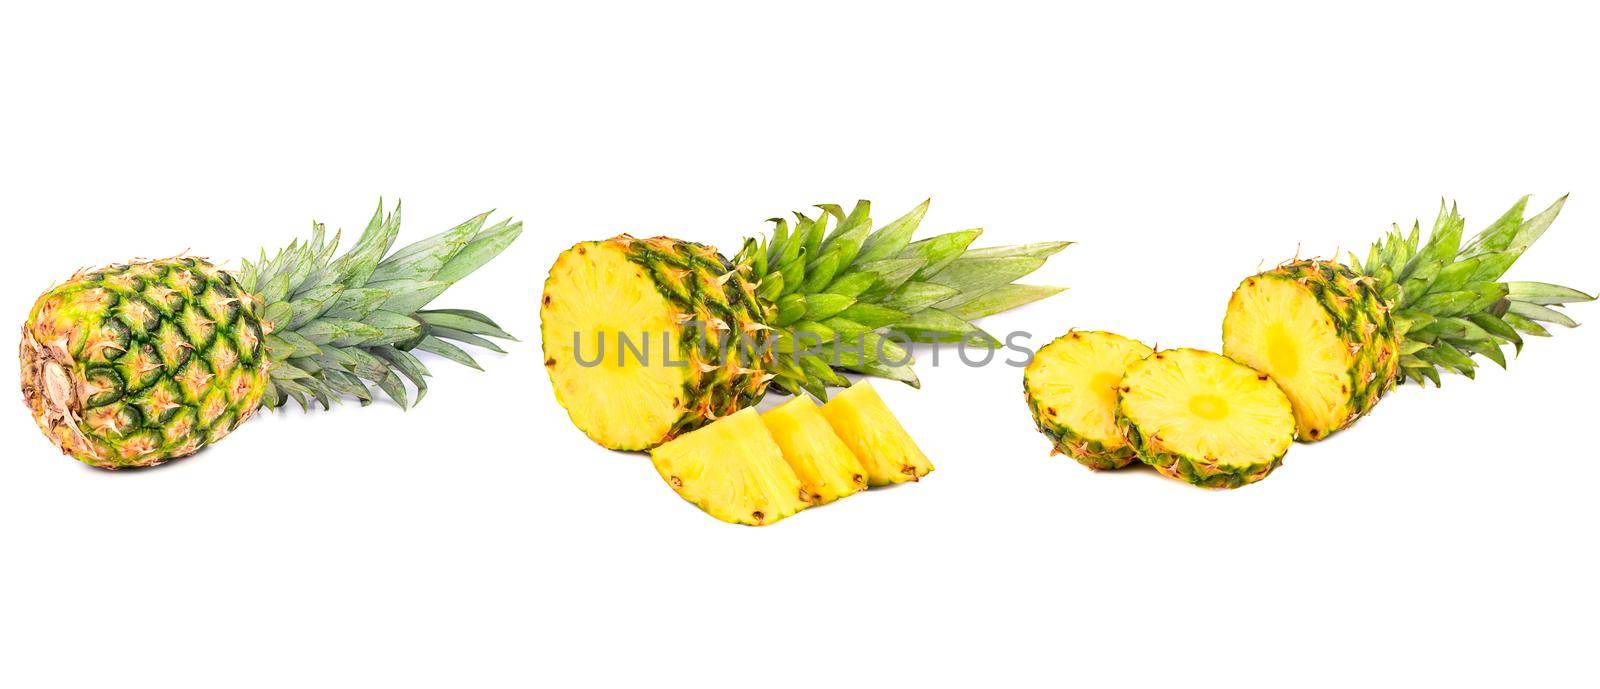 Pineapple collection. Whole and sliced pineapple isolated on white background with clipping path